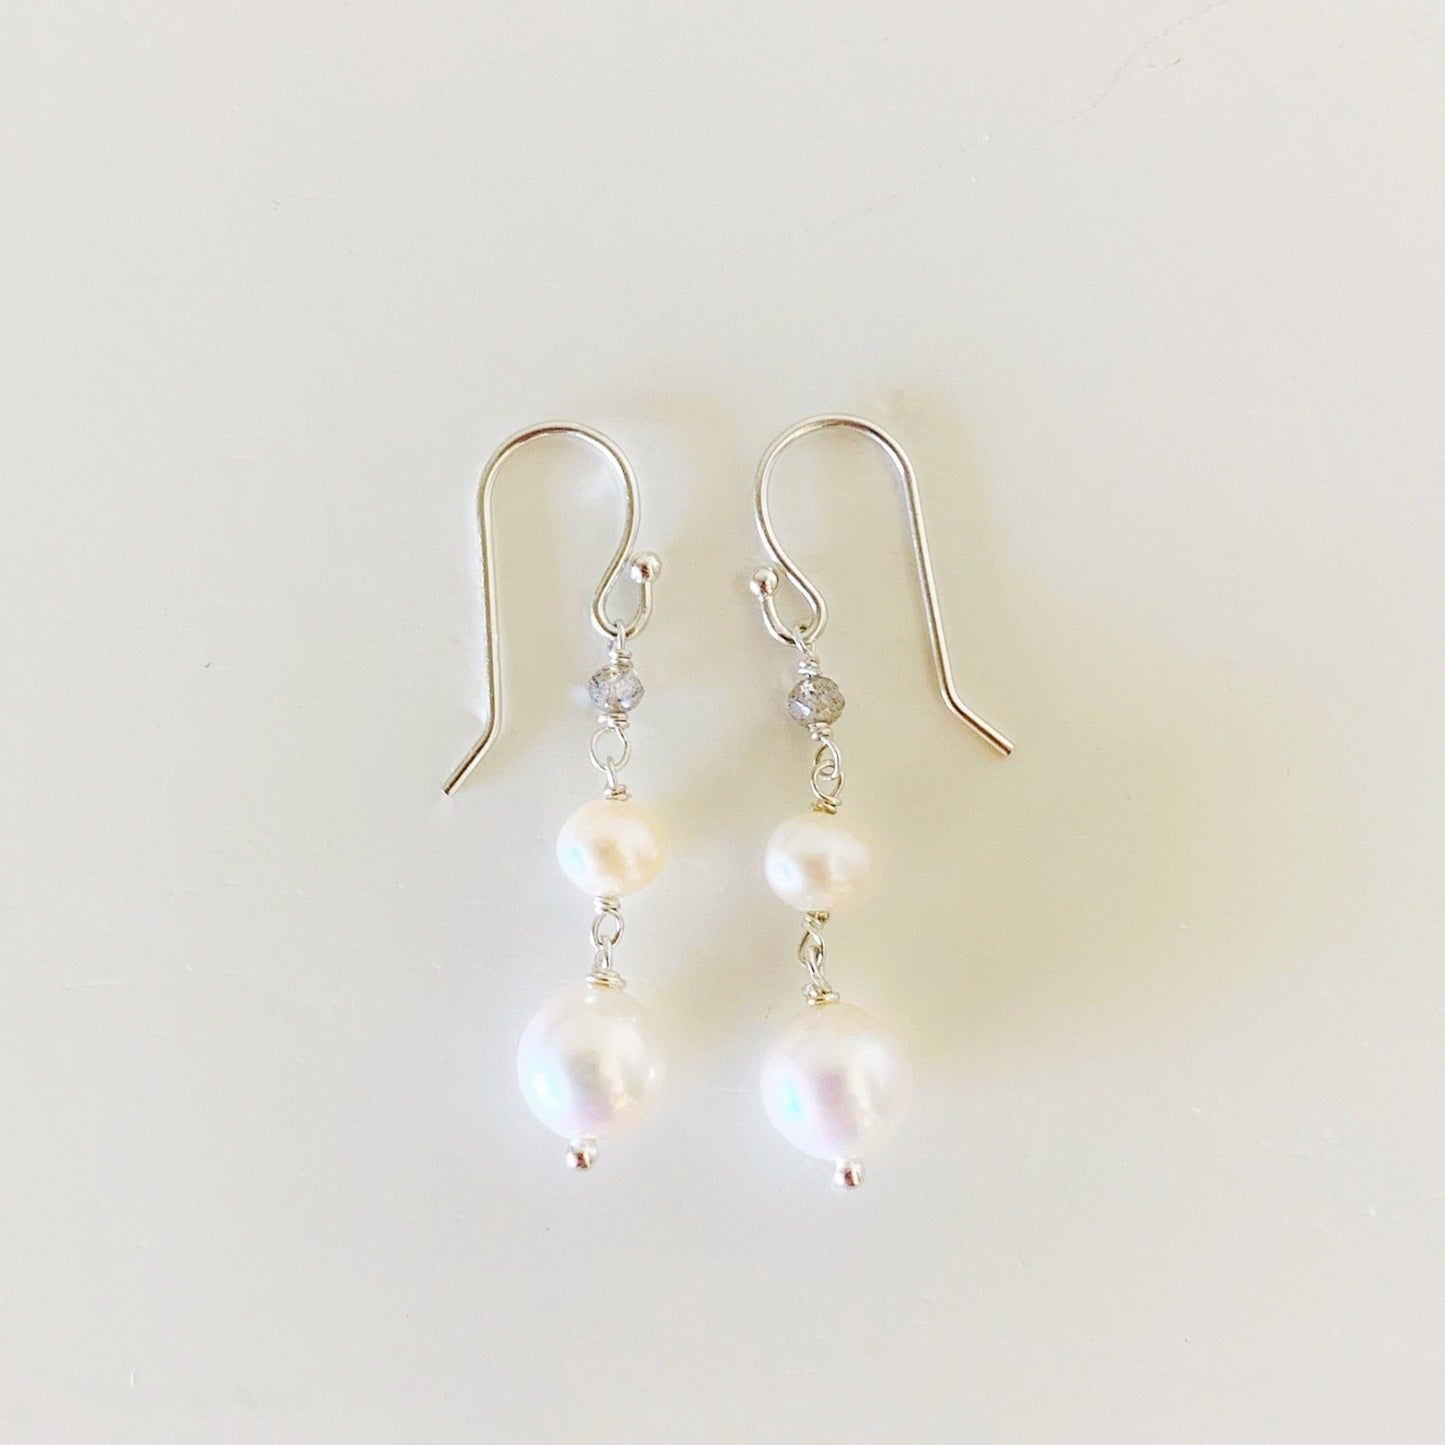 The westport earrings by mermaids and madeleines are created with freshwater pearl and labradorite gems. A simple dangling earring with sterling silver findings. This pair of earrings is photographed on a white surface